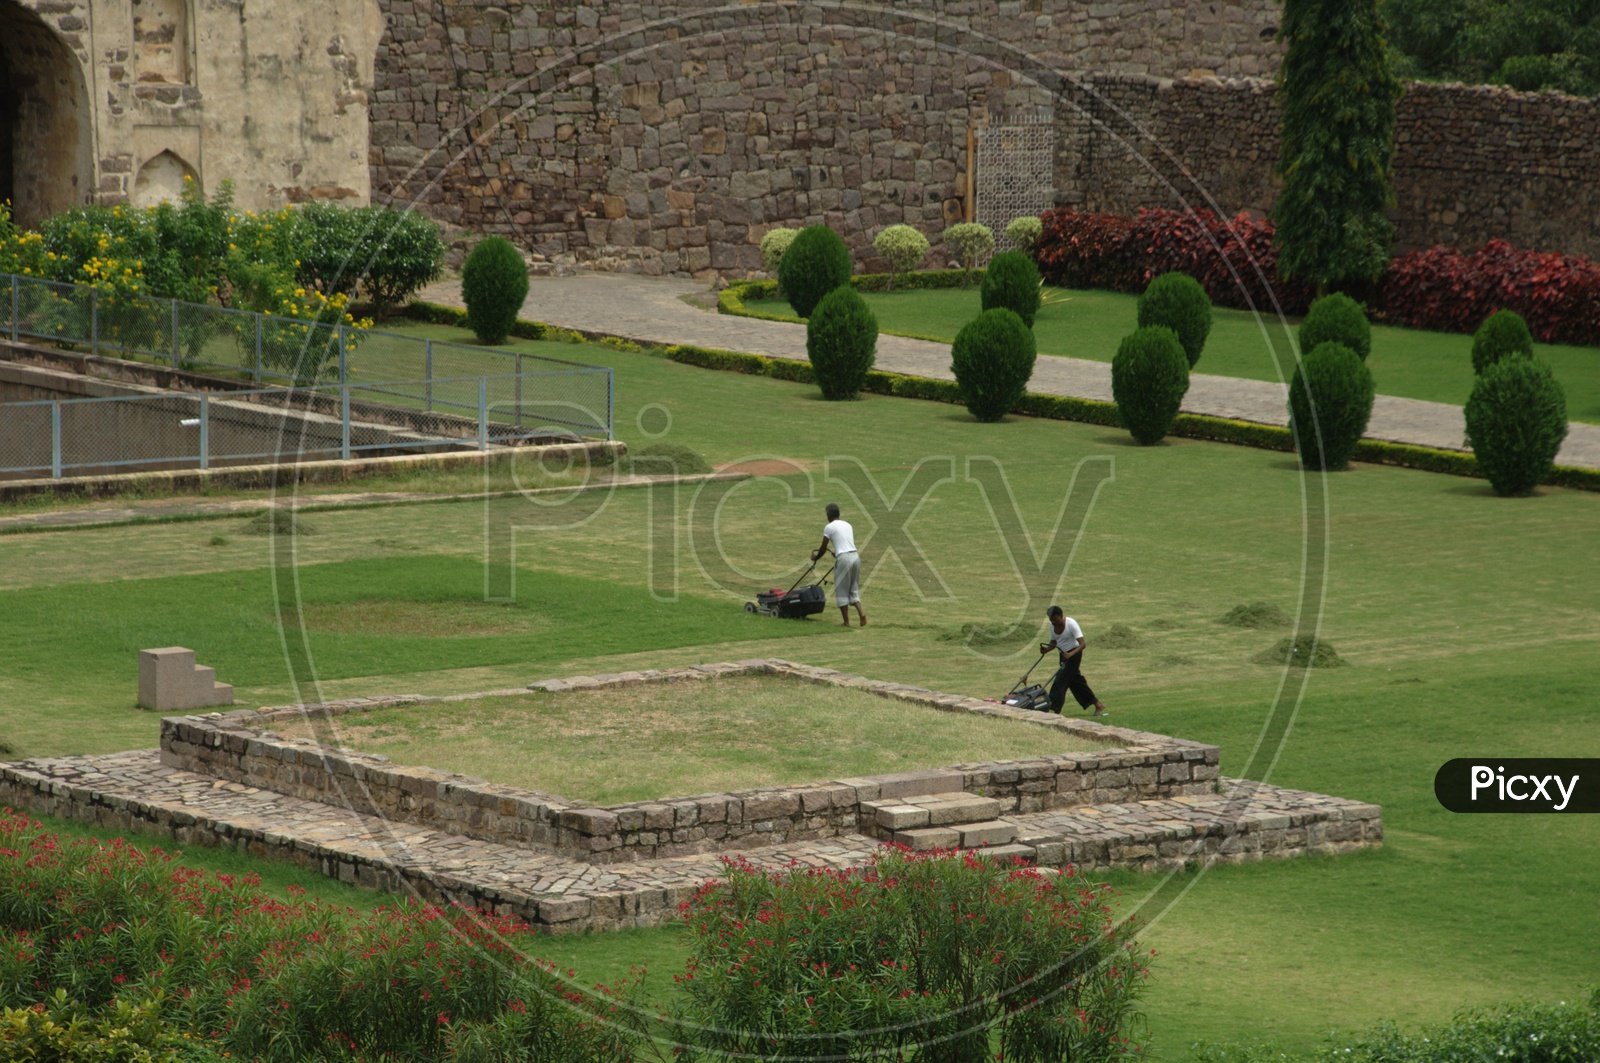 Indian Man Working In A Garden Trimming  The  Lawn Grass